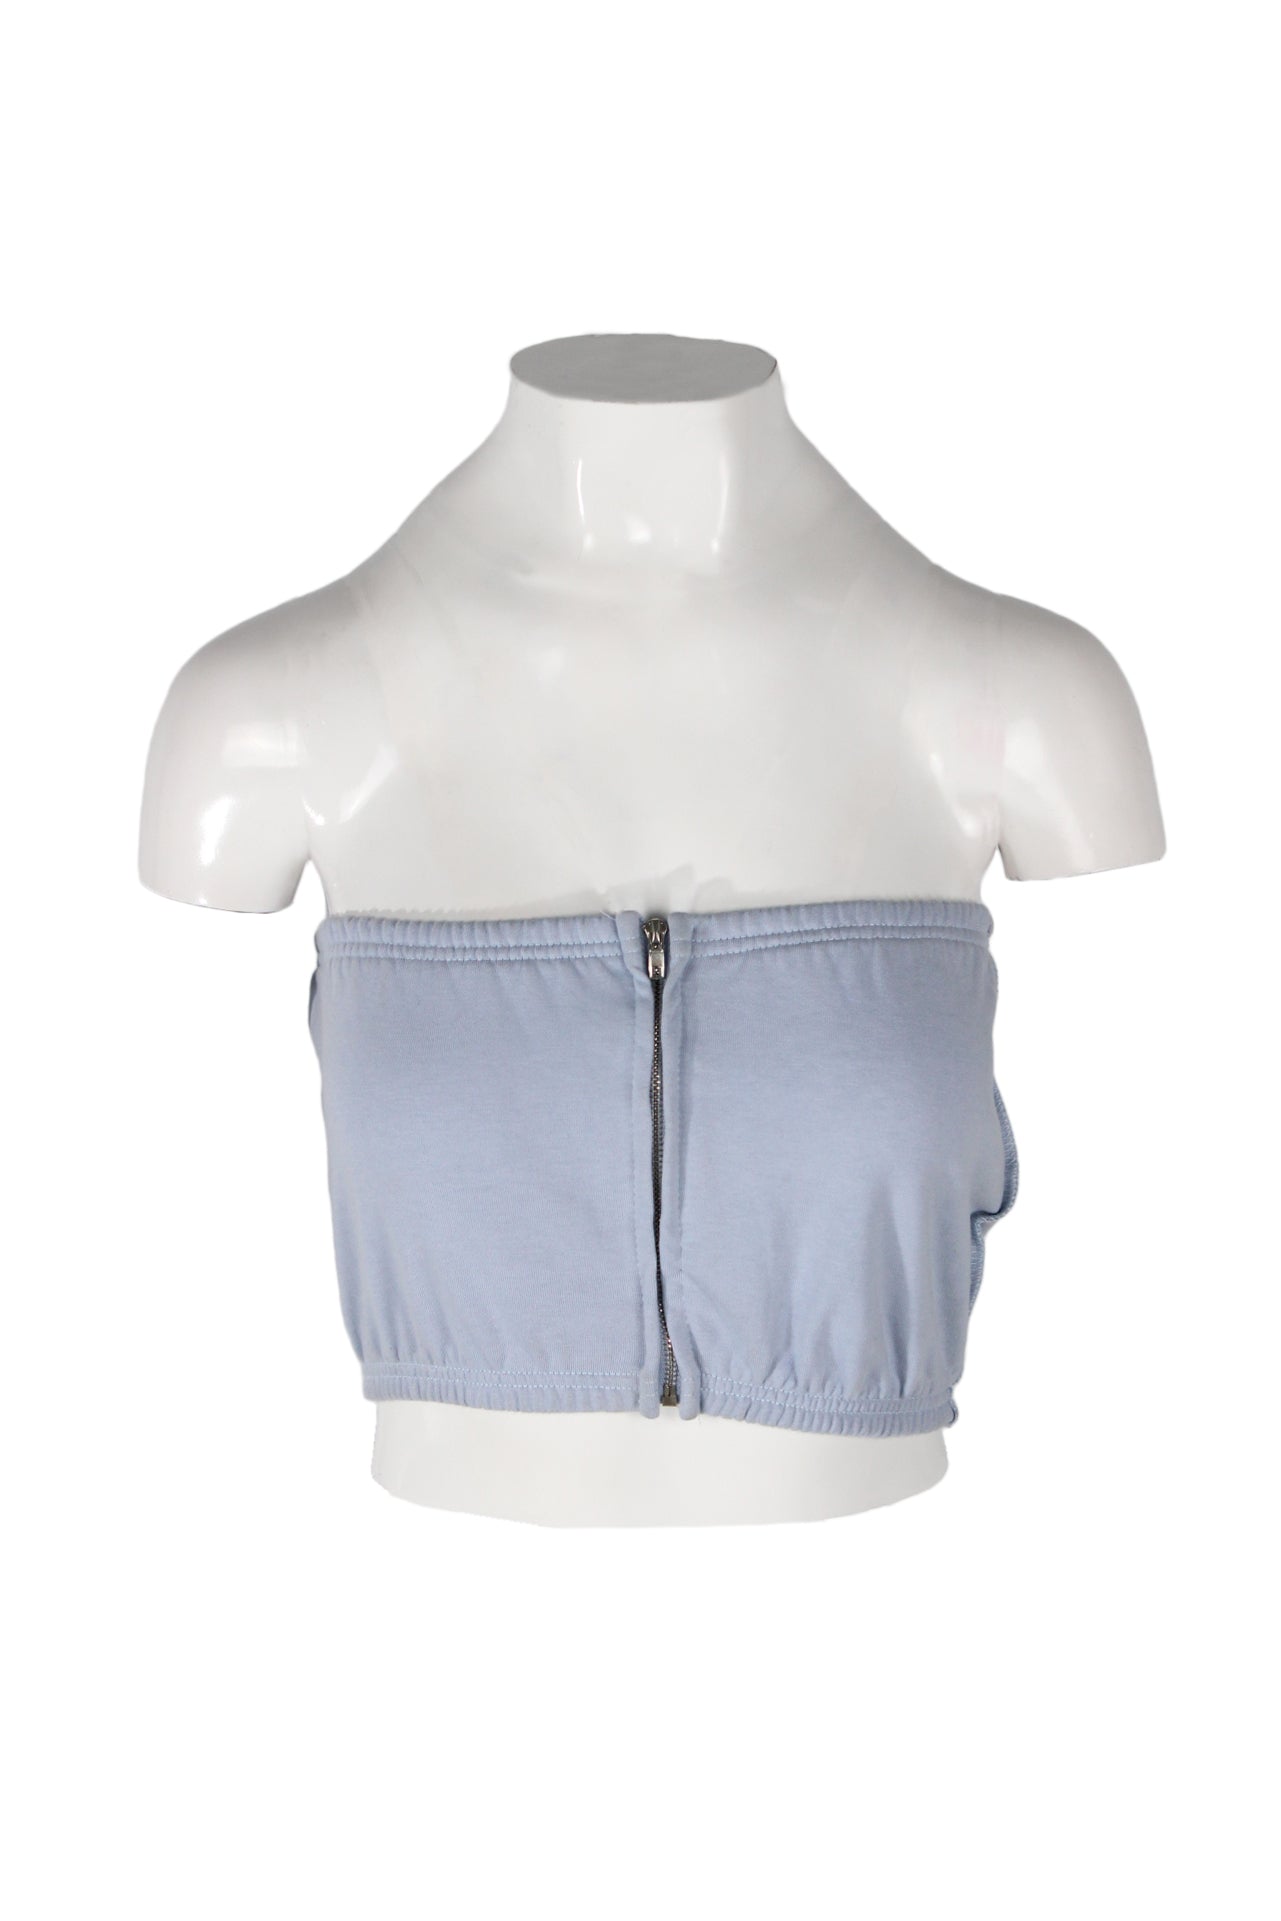 front angle ood one out light periwinkle knit tube top on feminine mannequin bust with elastic edging and silver-toned center front zip closure.